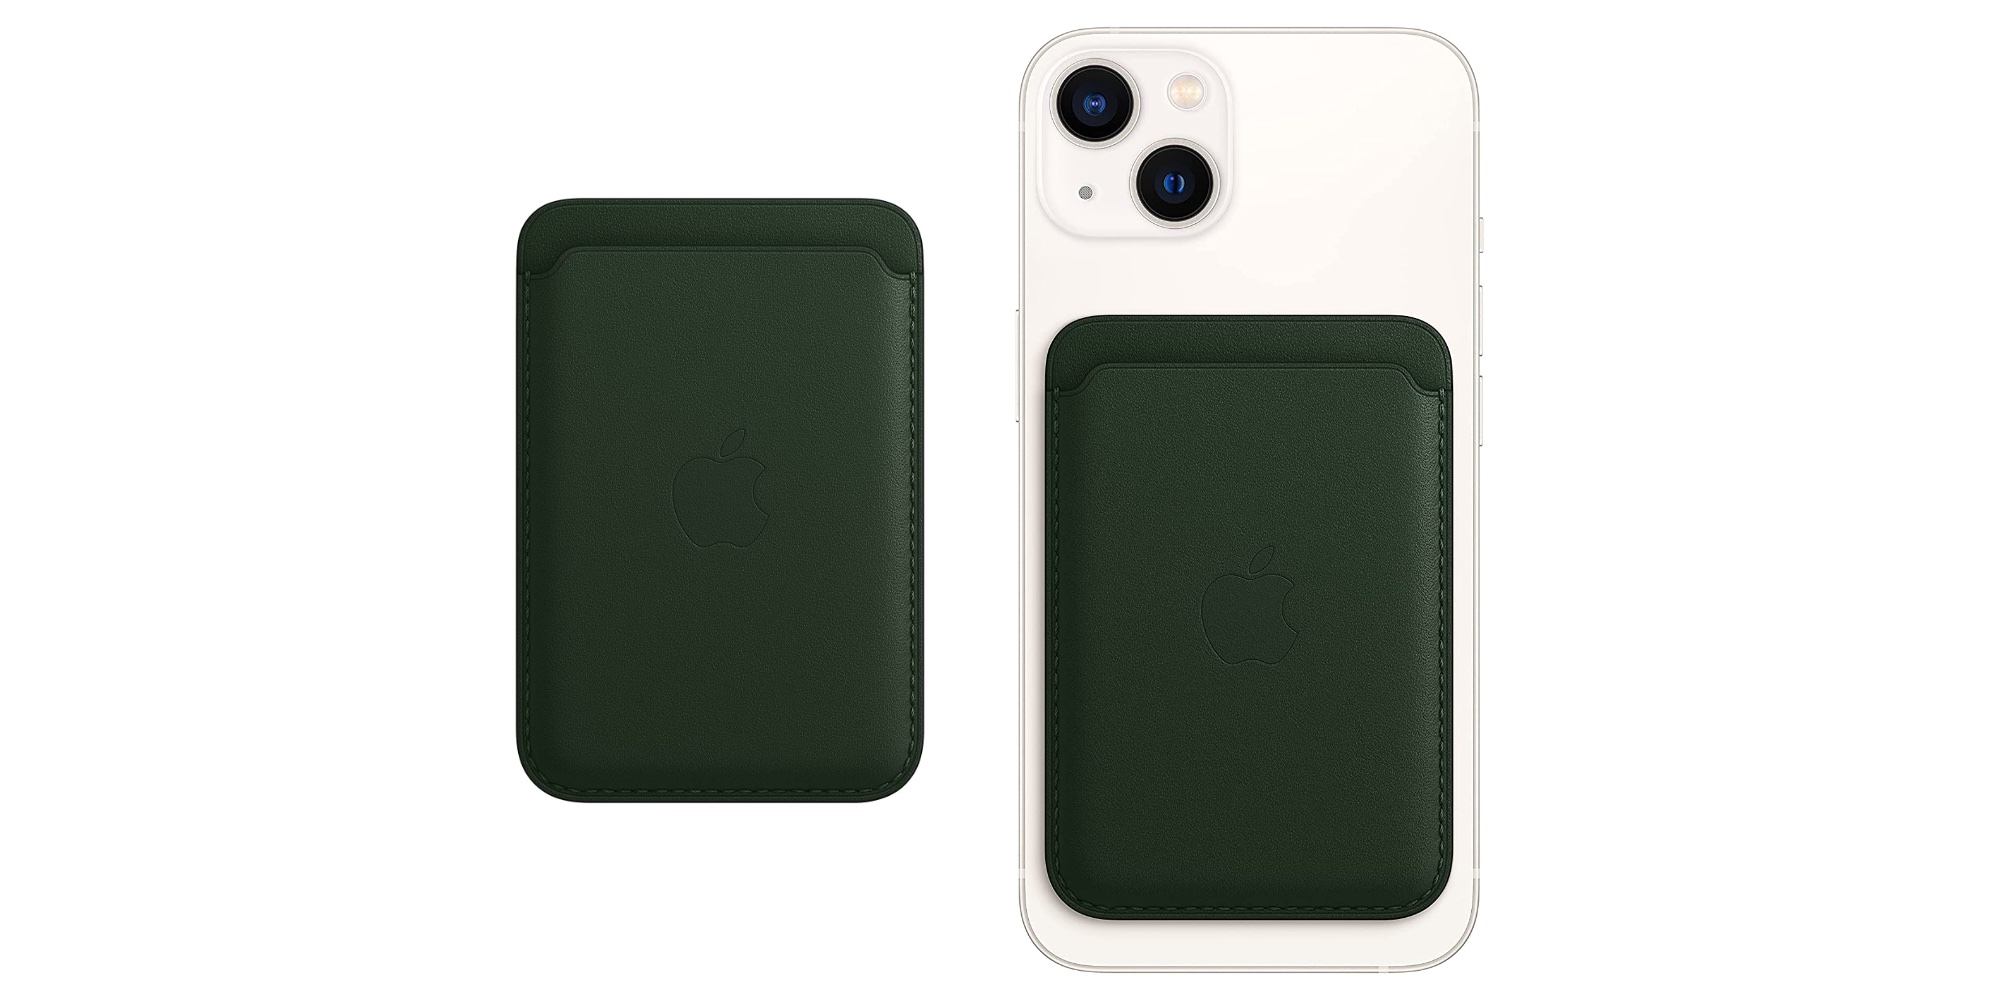 Pair your new green iPhone 13 with Apple's Find My leather MagSafe